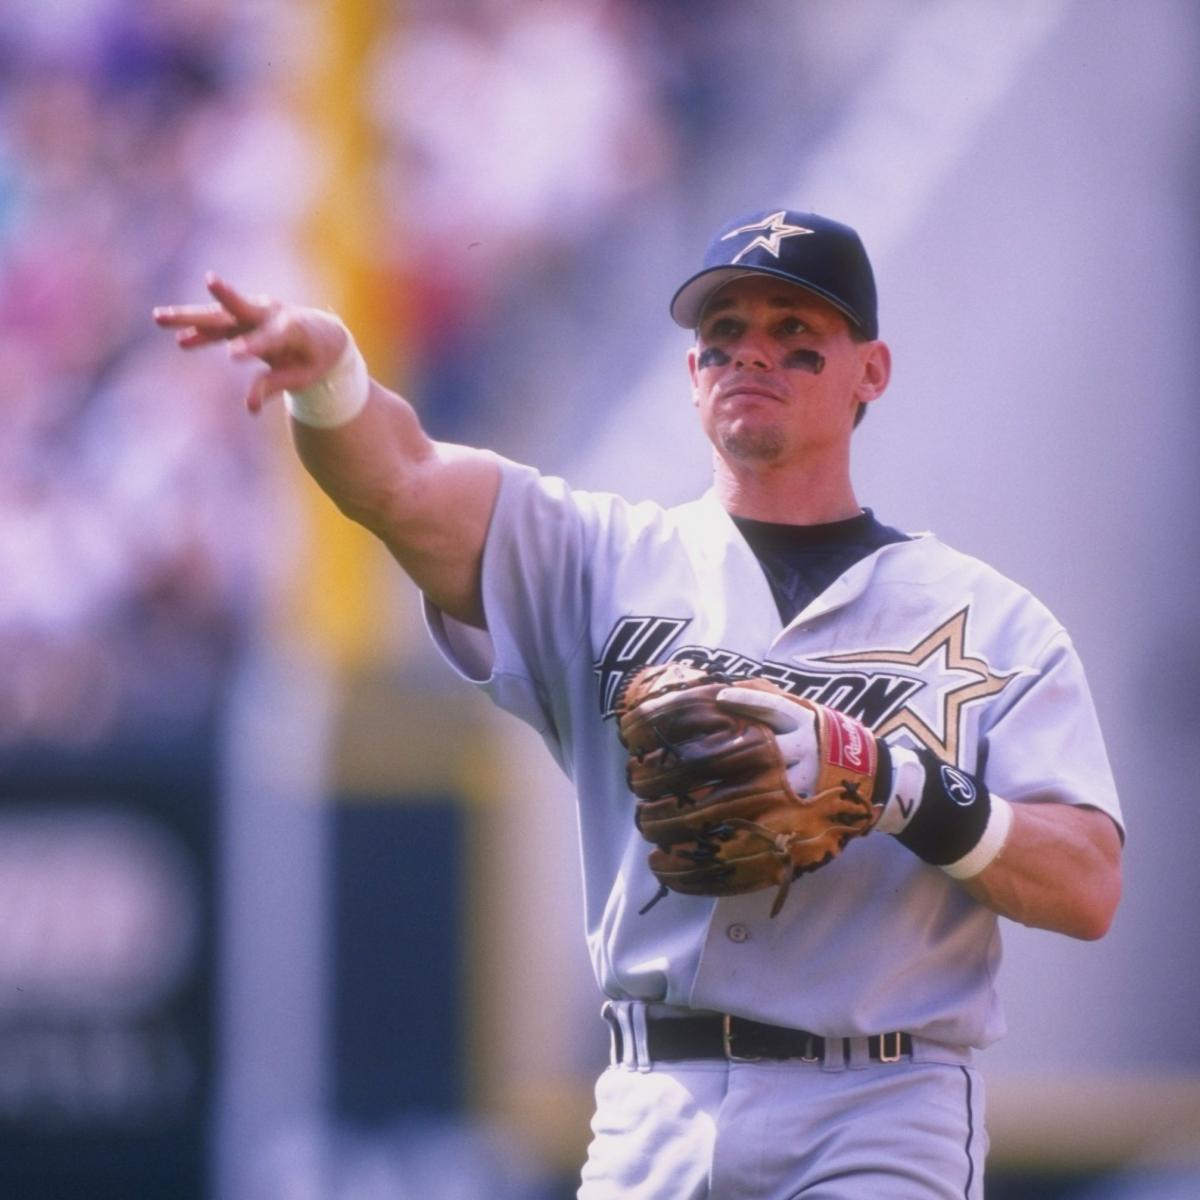 Extra bases made a difference to Hall of Famer Craig Biggio - Newsday